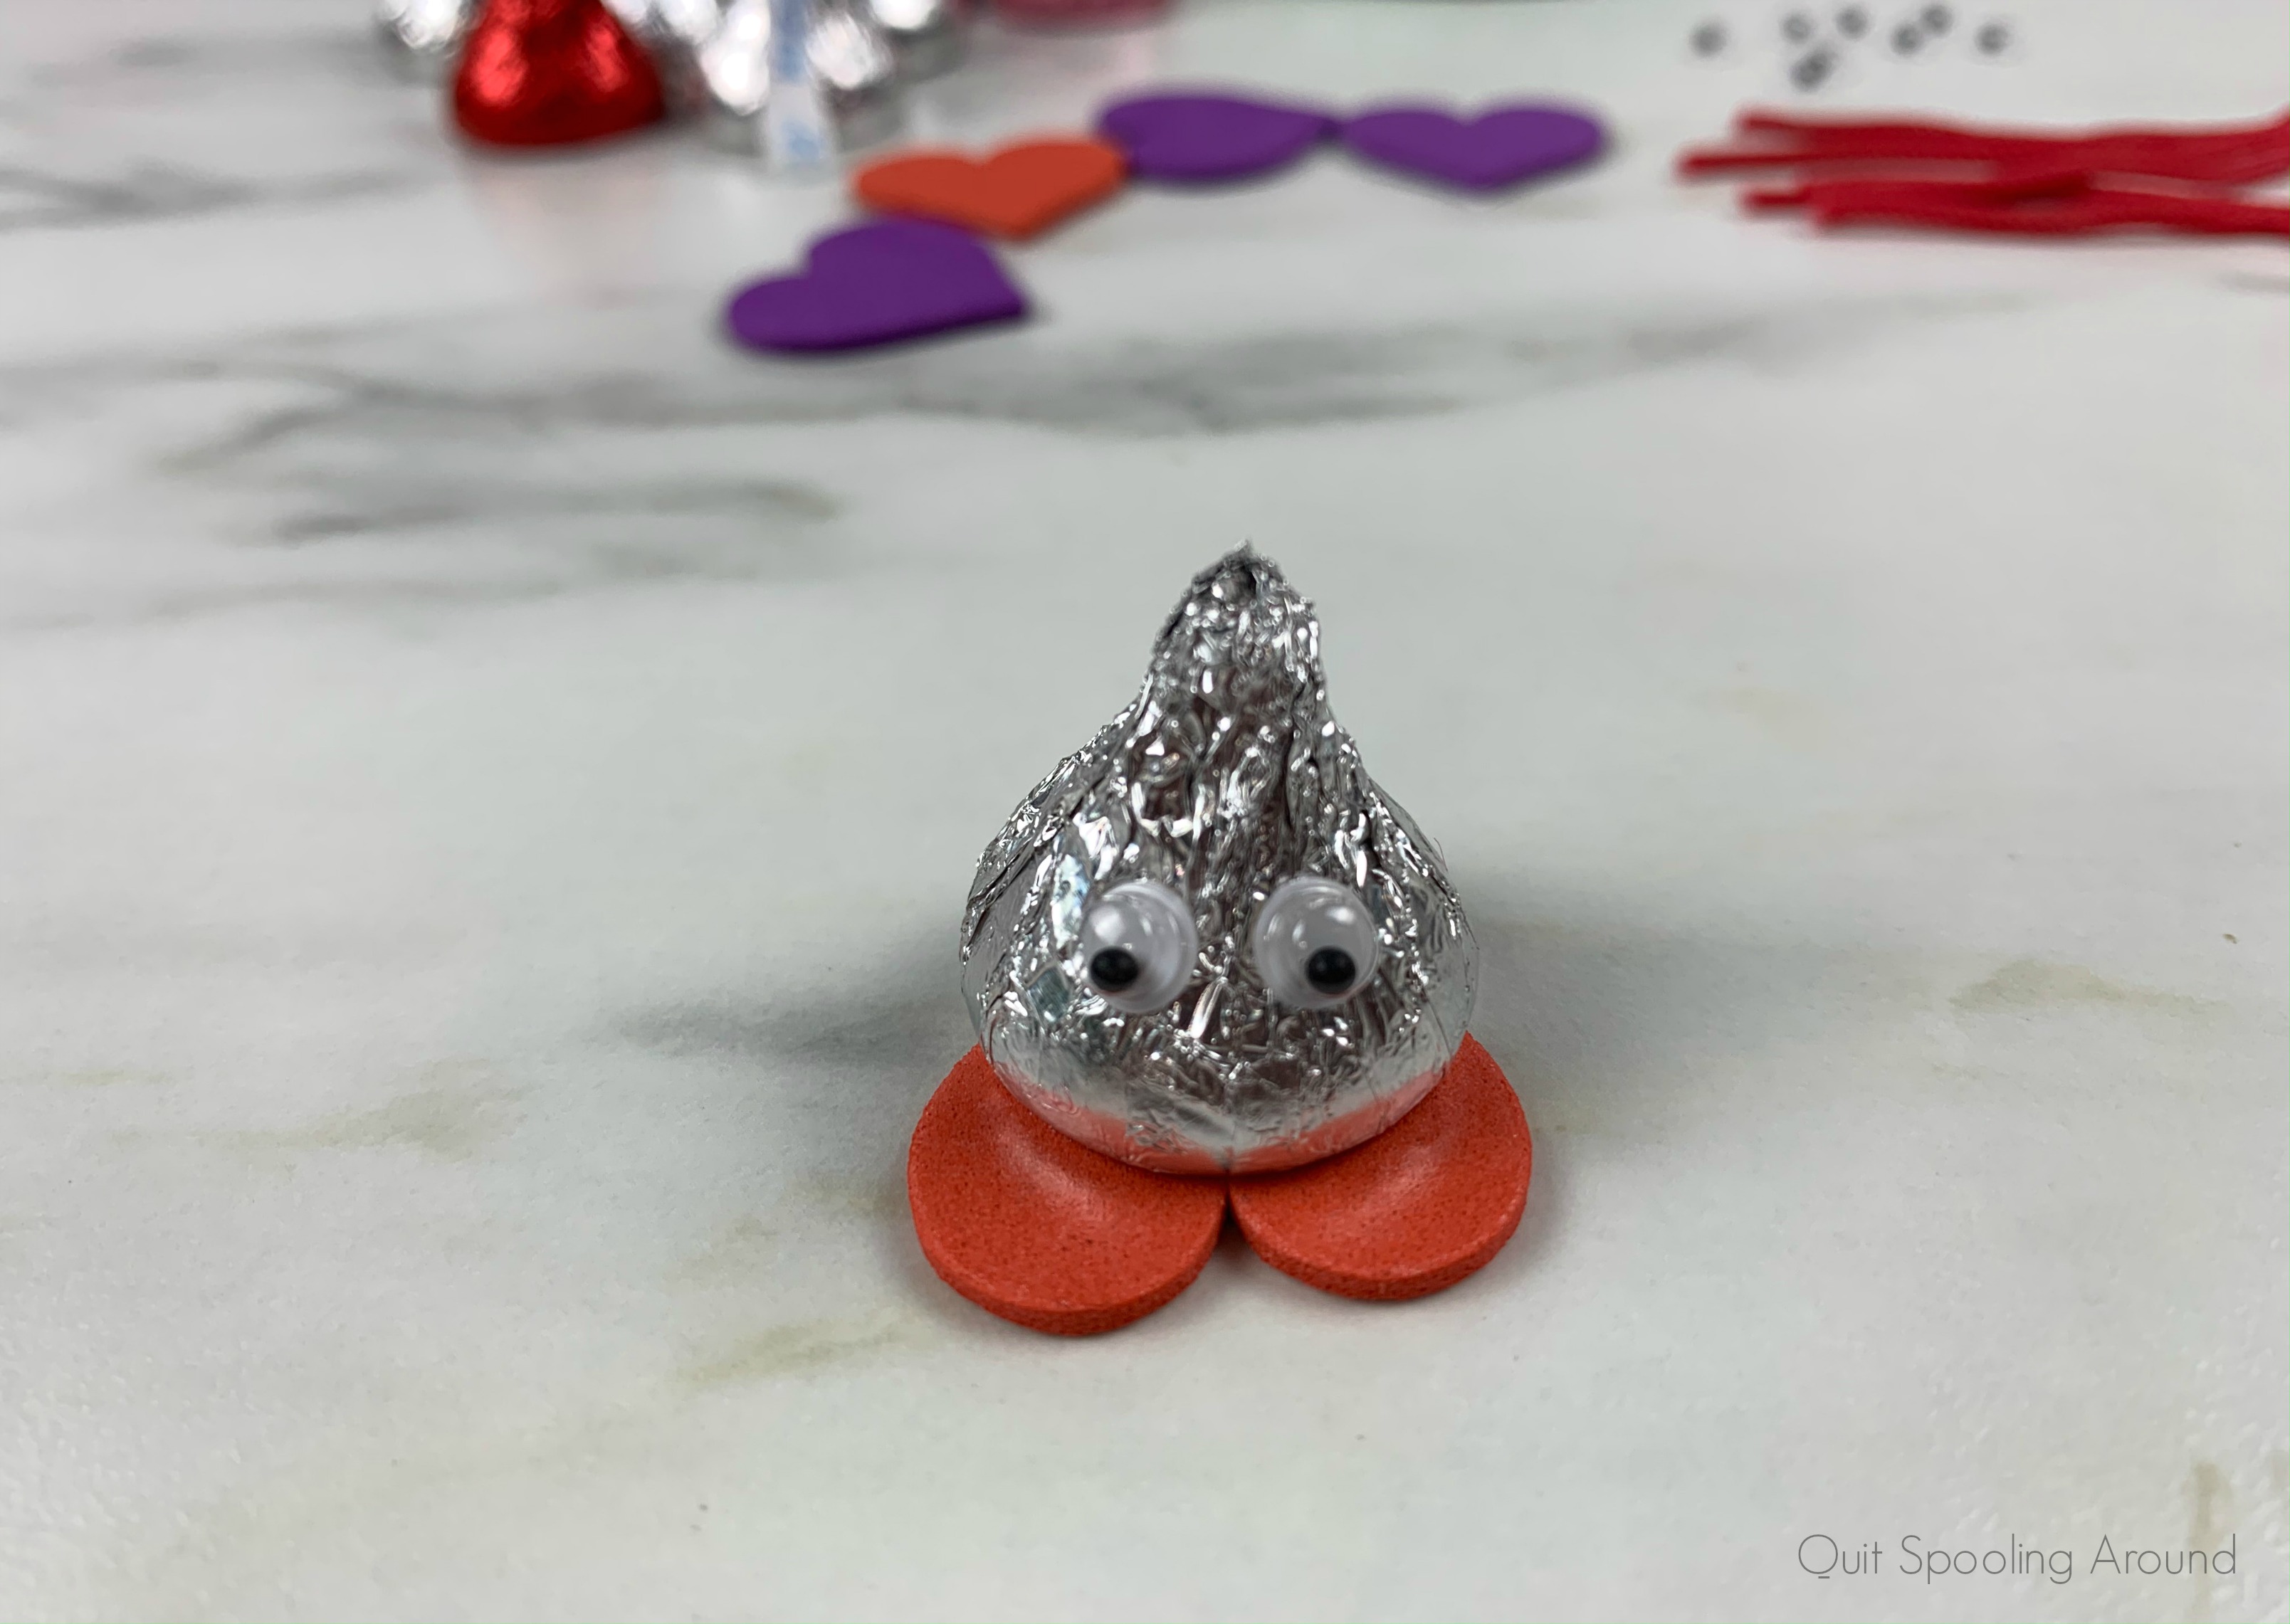 Add googly eyes to Hershey's Kiss